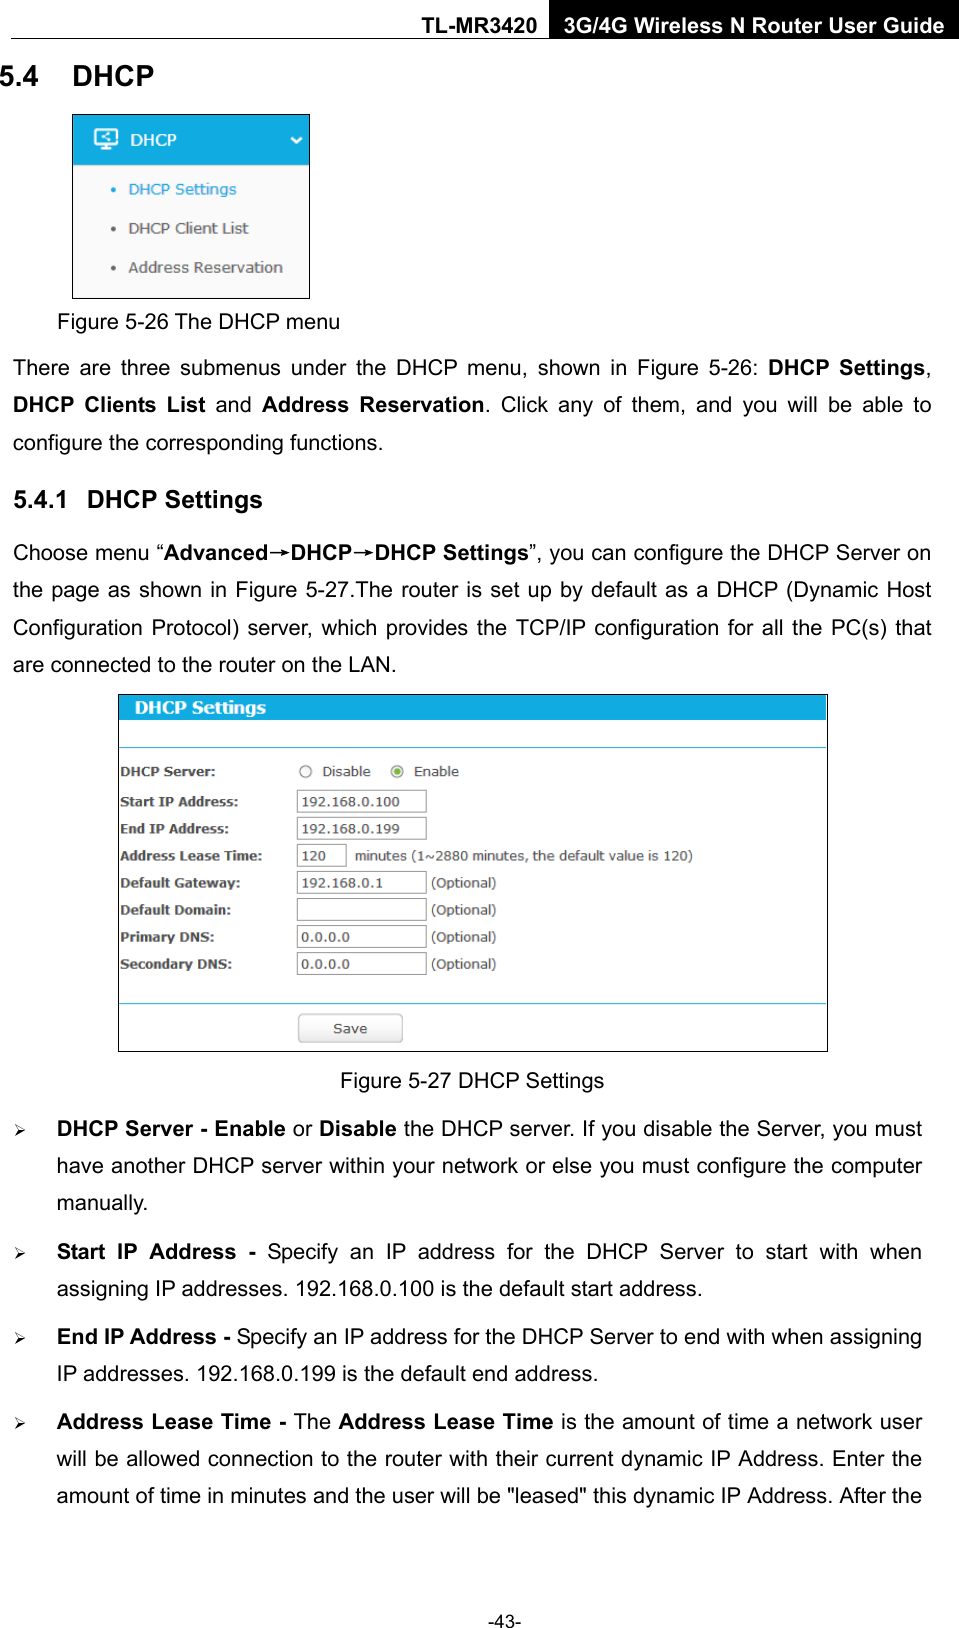    -43- TL-MR3420 3G/4G Wireless N Router User Guide 5.4 DHCP  Figure 5-26 The DHCP menu There are three submenus under the DHCP menu,  shown in Figure  5-26:  DHCP Settings, DHCP Clients List  and  Address Reservation. Click any of them, and you will be able to configure the corresponding functions. 5.4.1 DHCP Settings Choose menu “Advanced→DHCP→DHCP Settings”, you can configure the DHCP Server on the page as shown in Figure 5-27.The router is set up by default as a DHCP (Dynamic Host Configuration Protocol) server, which provides the TCP/IP configuration for all the PC(s) that are connected to the router on the LAN.    Figure 5-27 DHCP Settings  DHCP Server - Enable or Disable the DHCP server. If you disable the Server, you must have another DHCP server within your network or else you must configure the computer manually.  Start IP Address - Specify an IP address for the DHCP Server to start with when assigning IP addresses. 192.168.0.100 is the default start address.  End IP Address - Specify an IP address for the DHCP Server to end with when assigning IP addresses. 192.168.0.199 is the default end address.  Address Lease Time - The Address Lease Time is the amount of time a network user will be allowed connection to the router with their current dynamic IP Address. Enter the amount of time in minutes and the user will be &quot;leased&quot; this dynamic IP Address. After the 